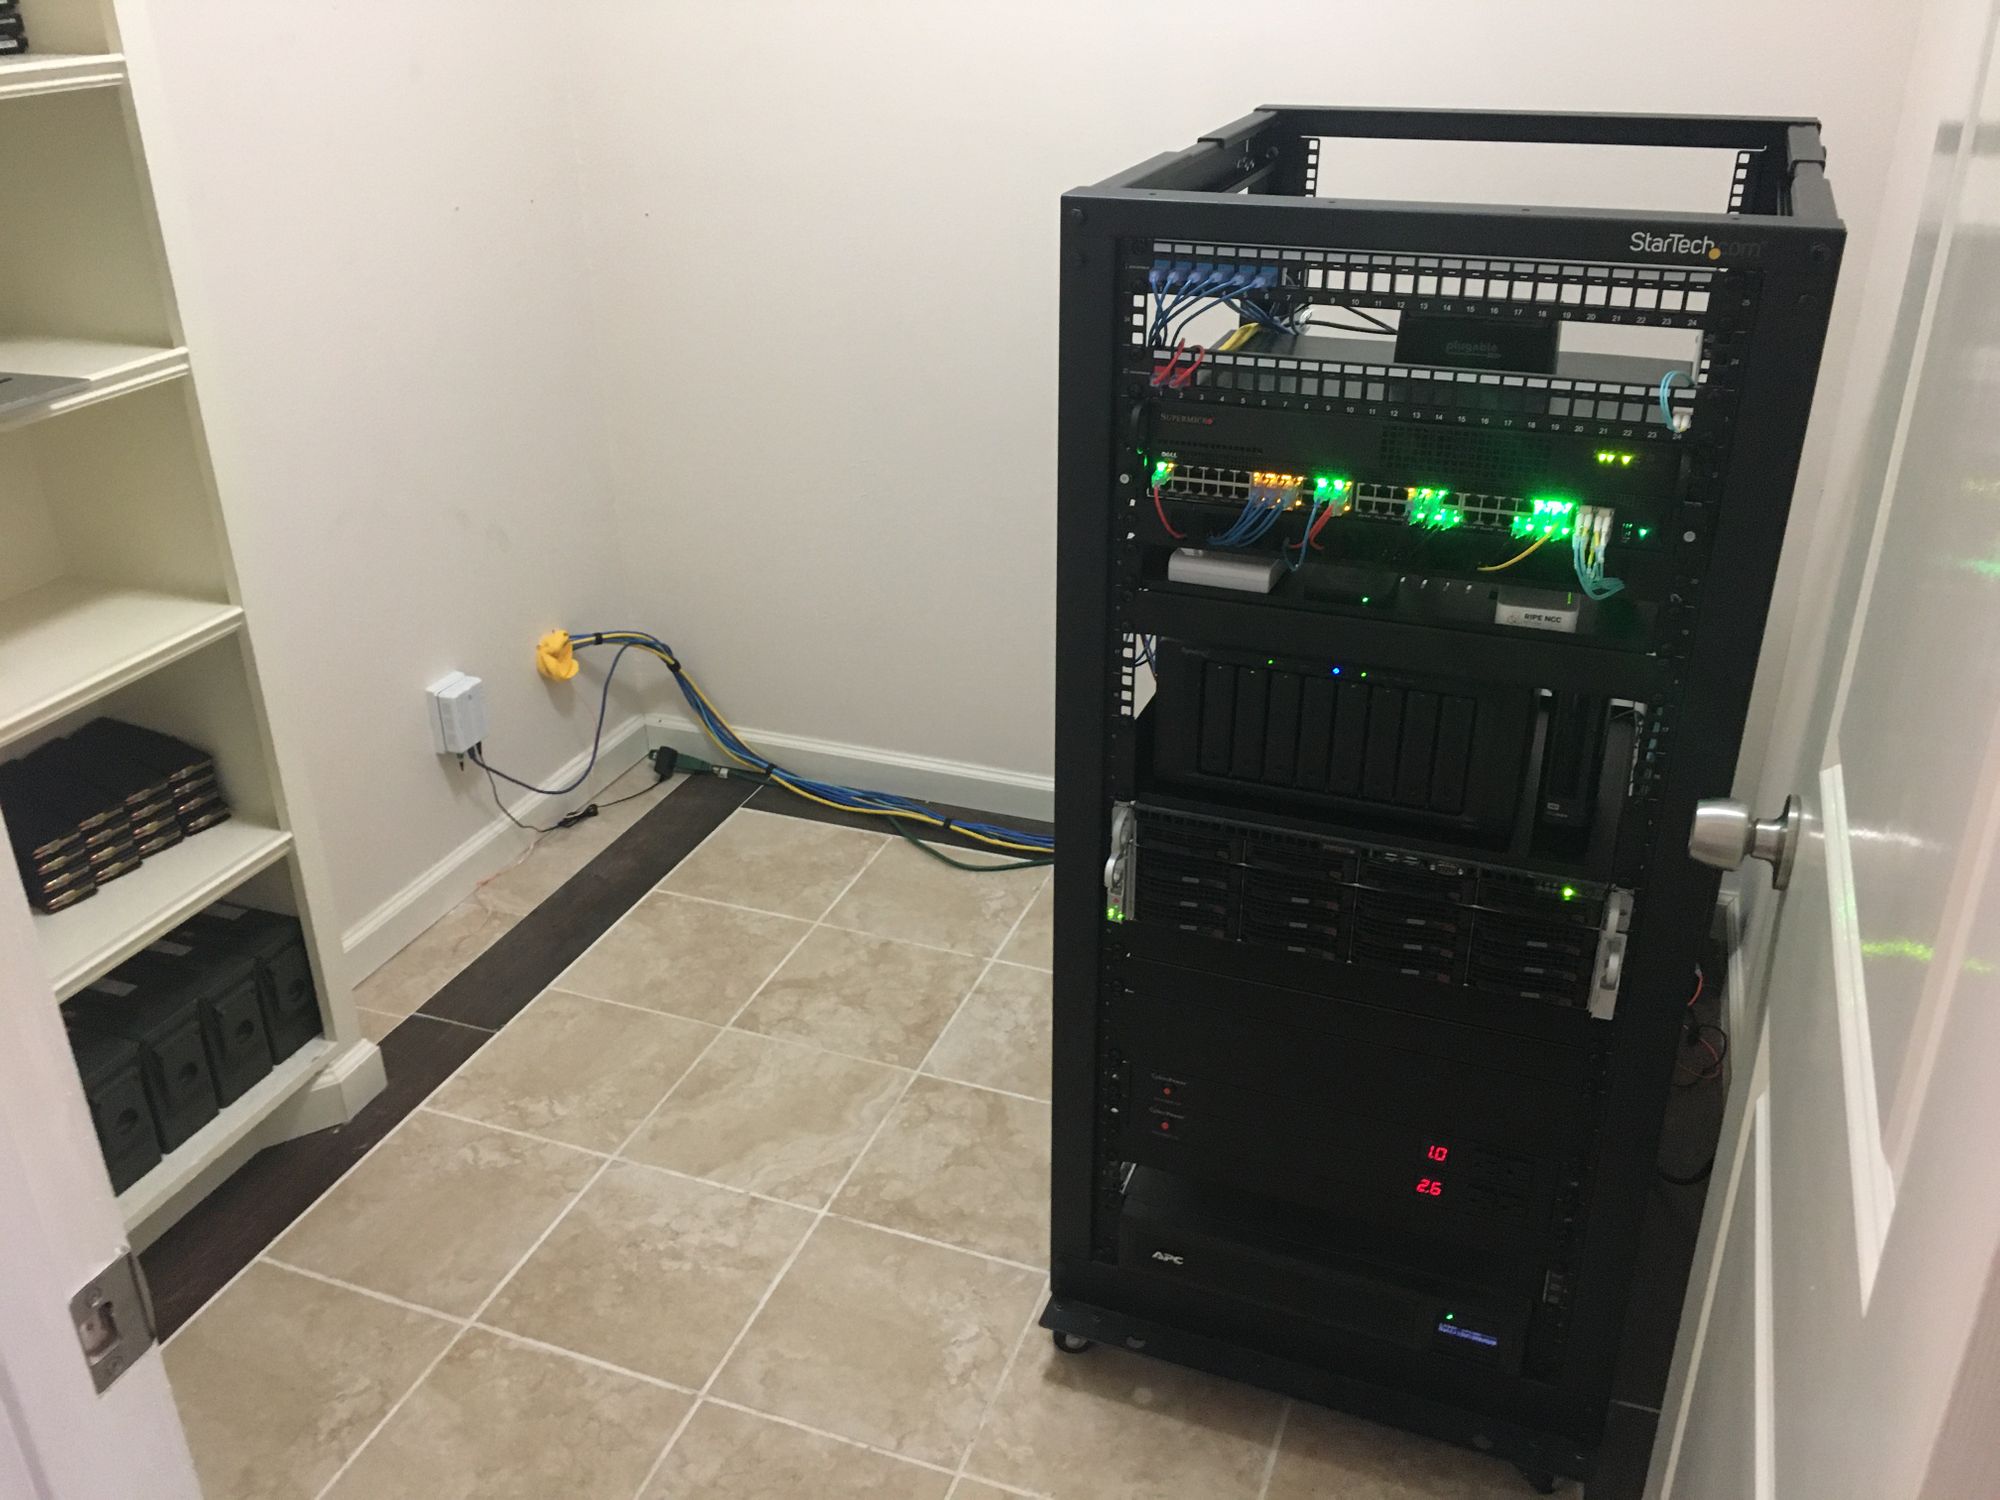 Cleaned up my Rack and "Server Room"